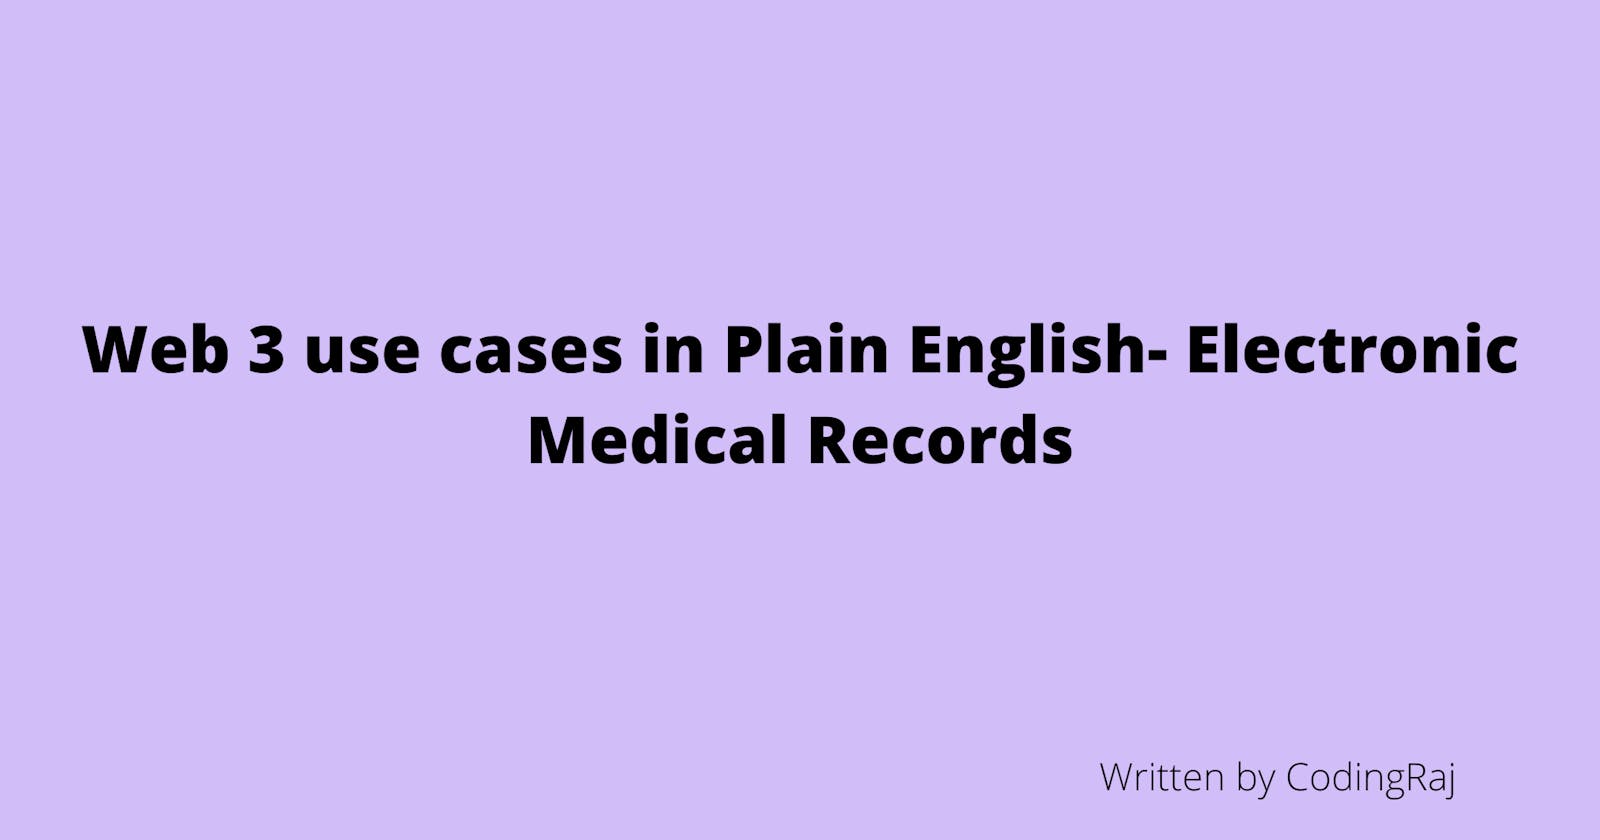 Web 3 use cases in Plain English- Electronic Medical Records